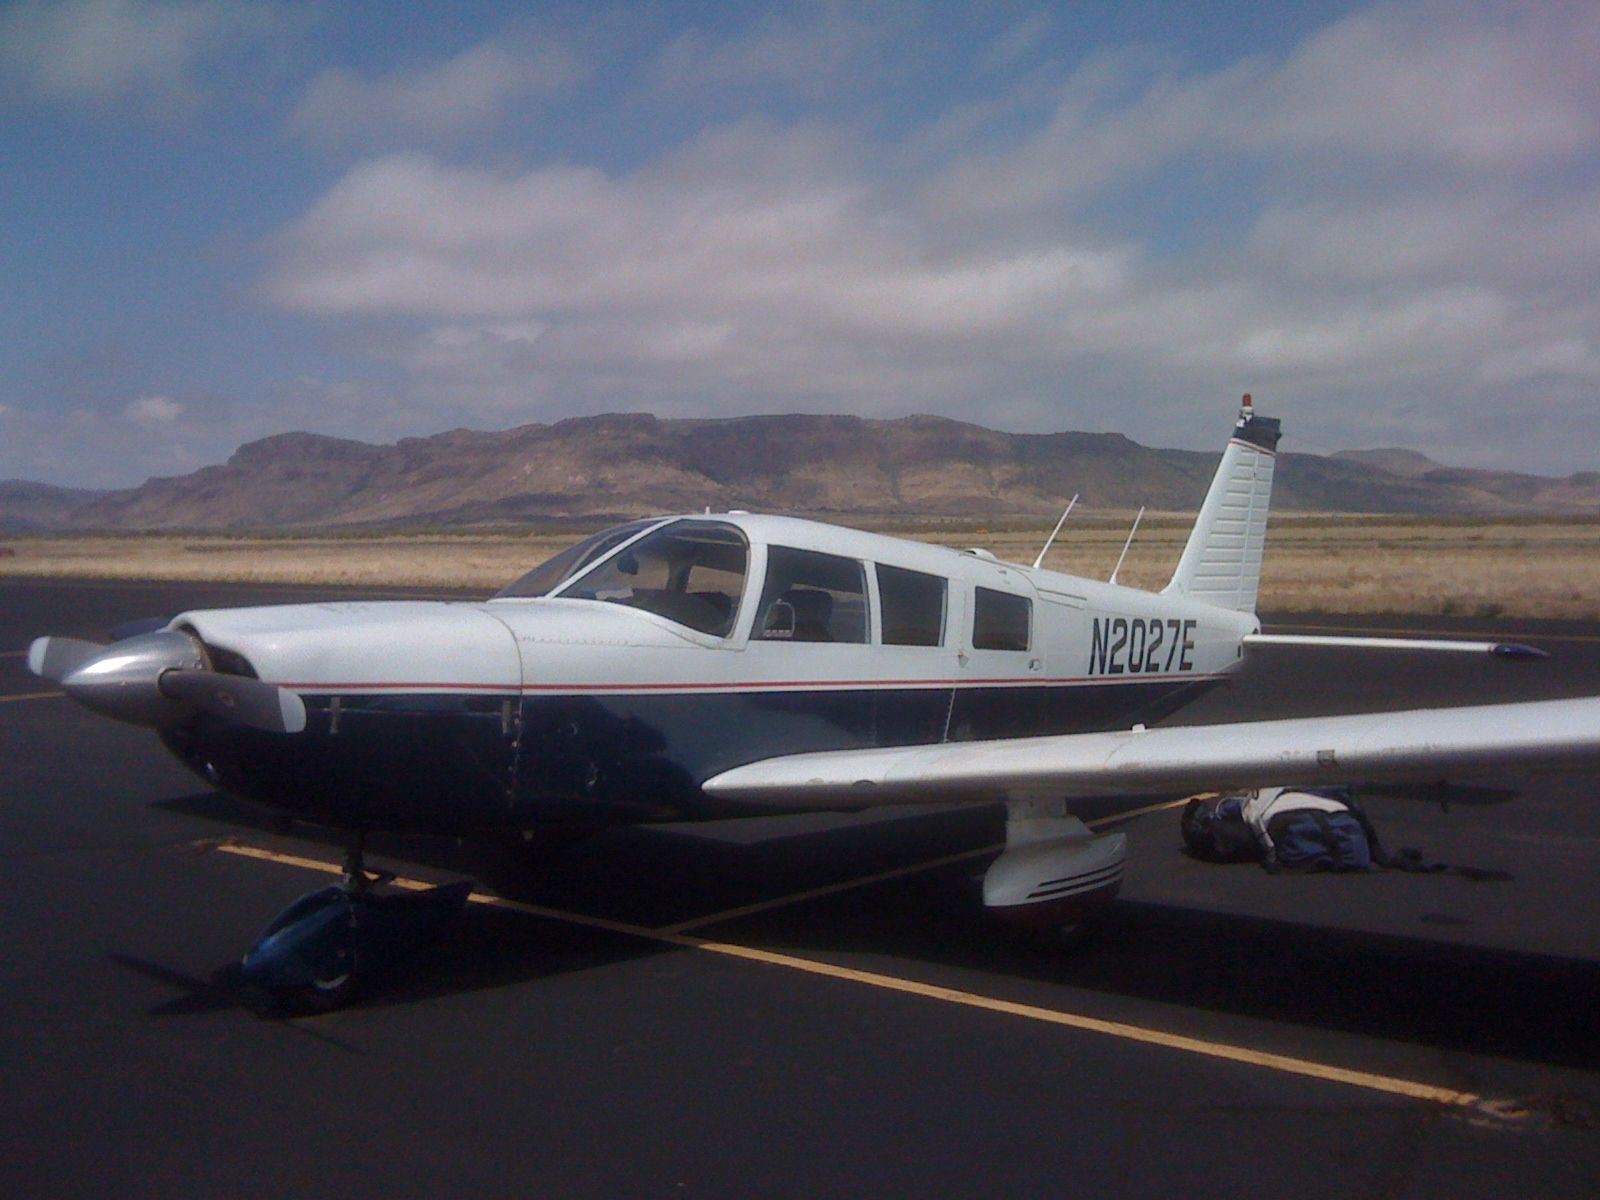 Piper Saratoga (N2027E) - Parked at Alpine, Tx for the night.